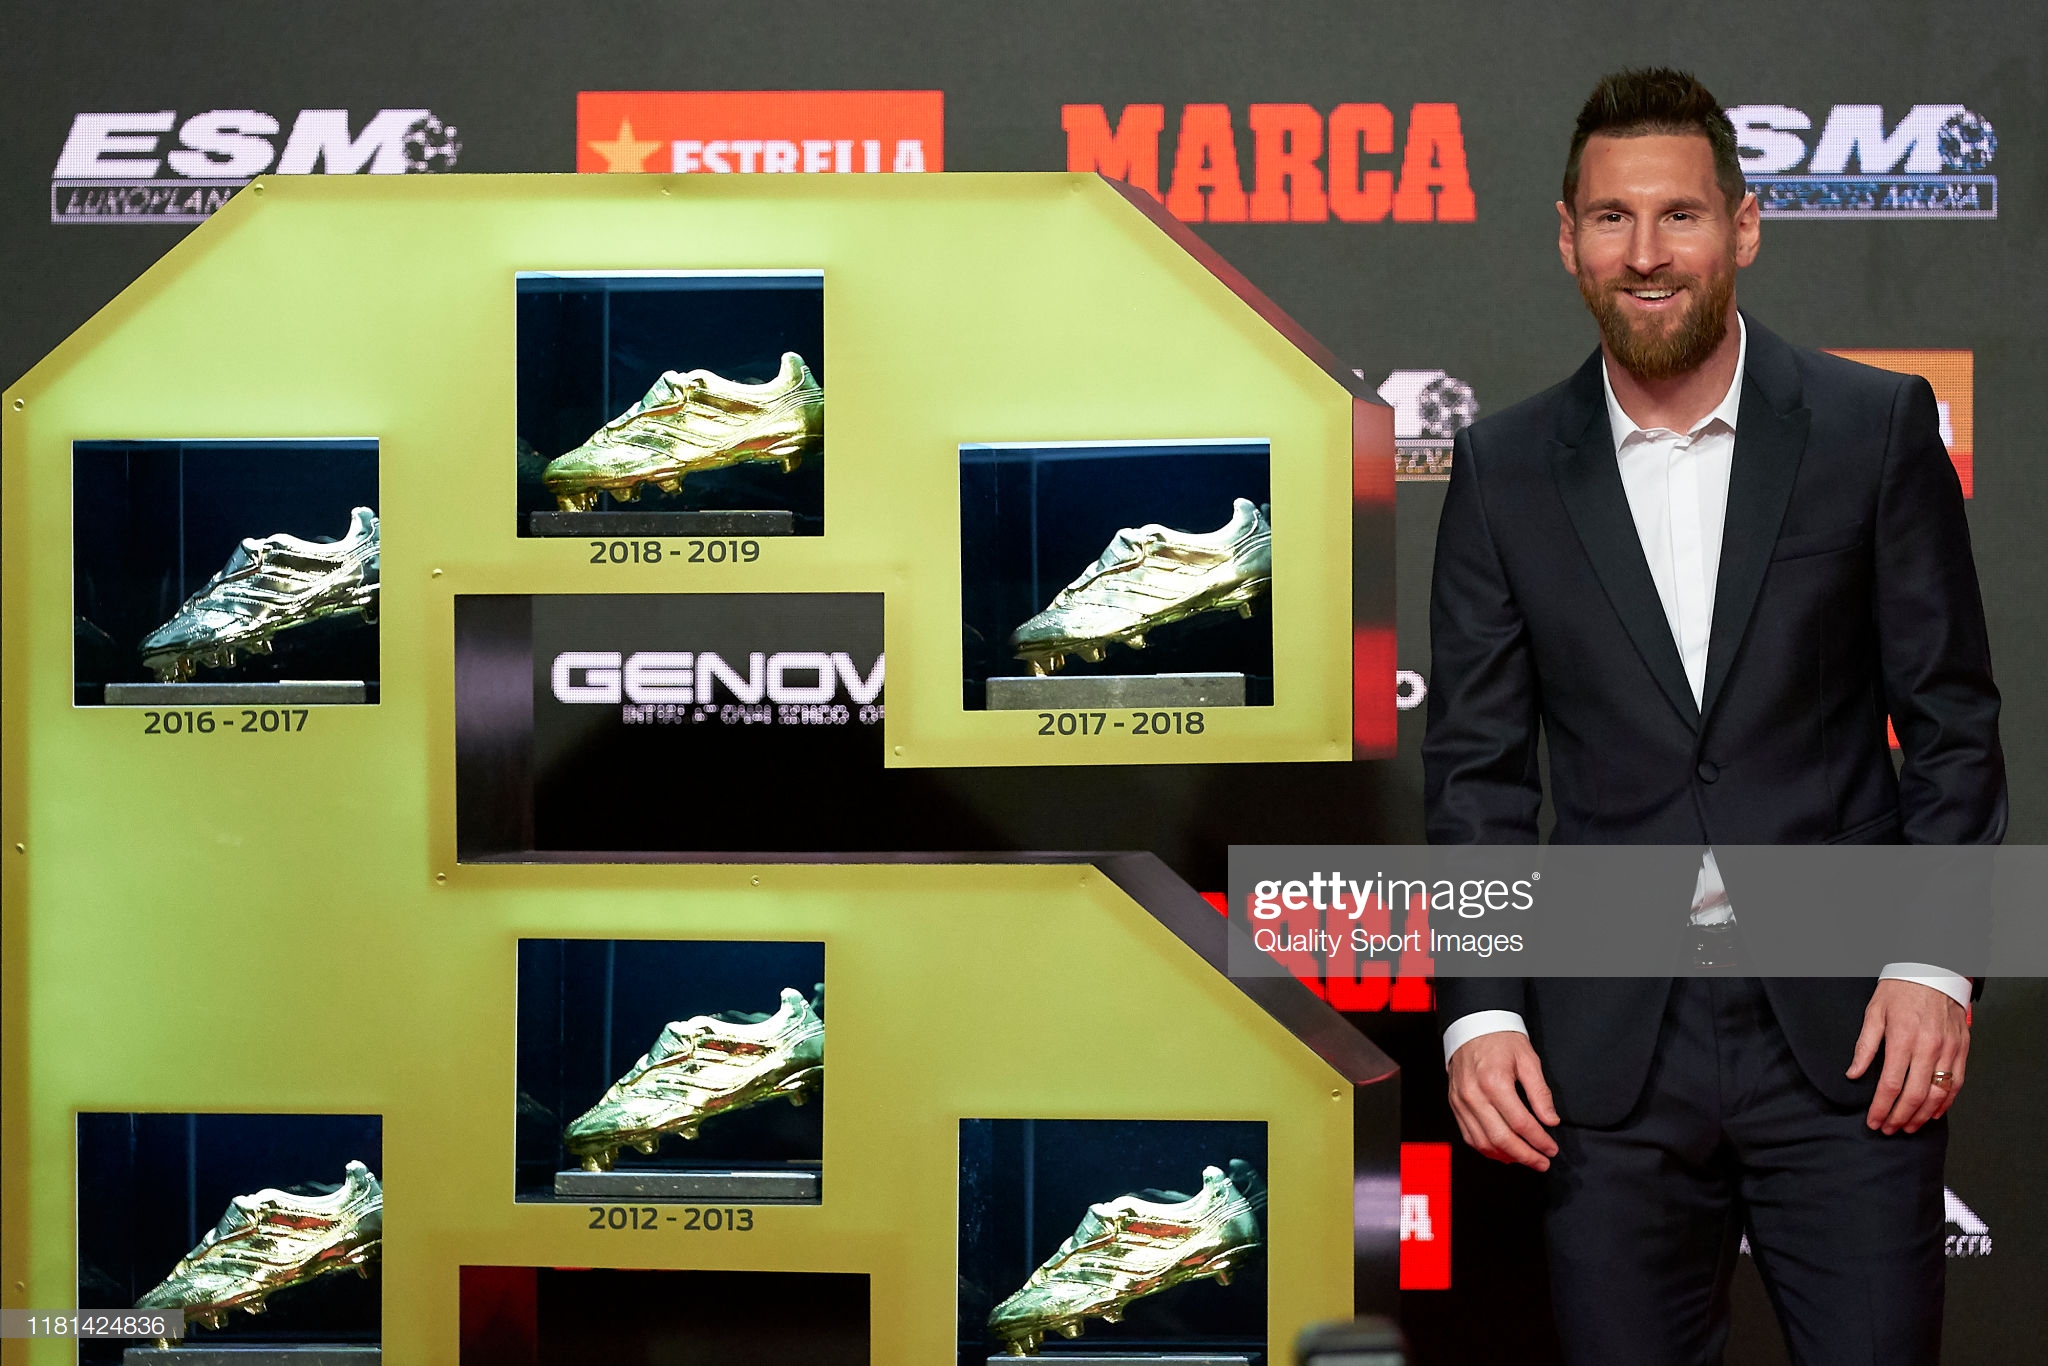 gettyimages-1181424836-2048x2048.jpg